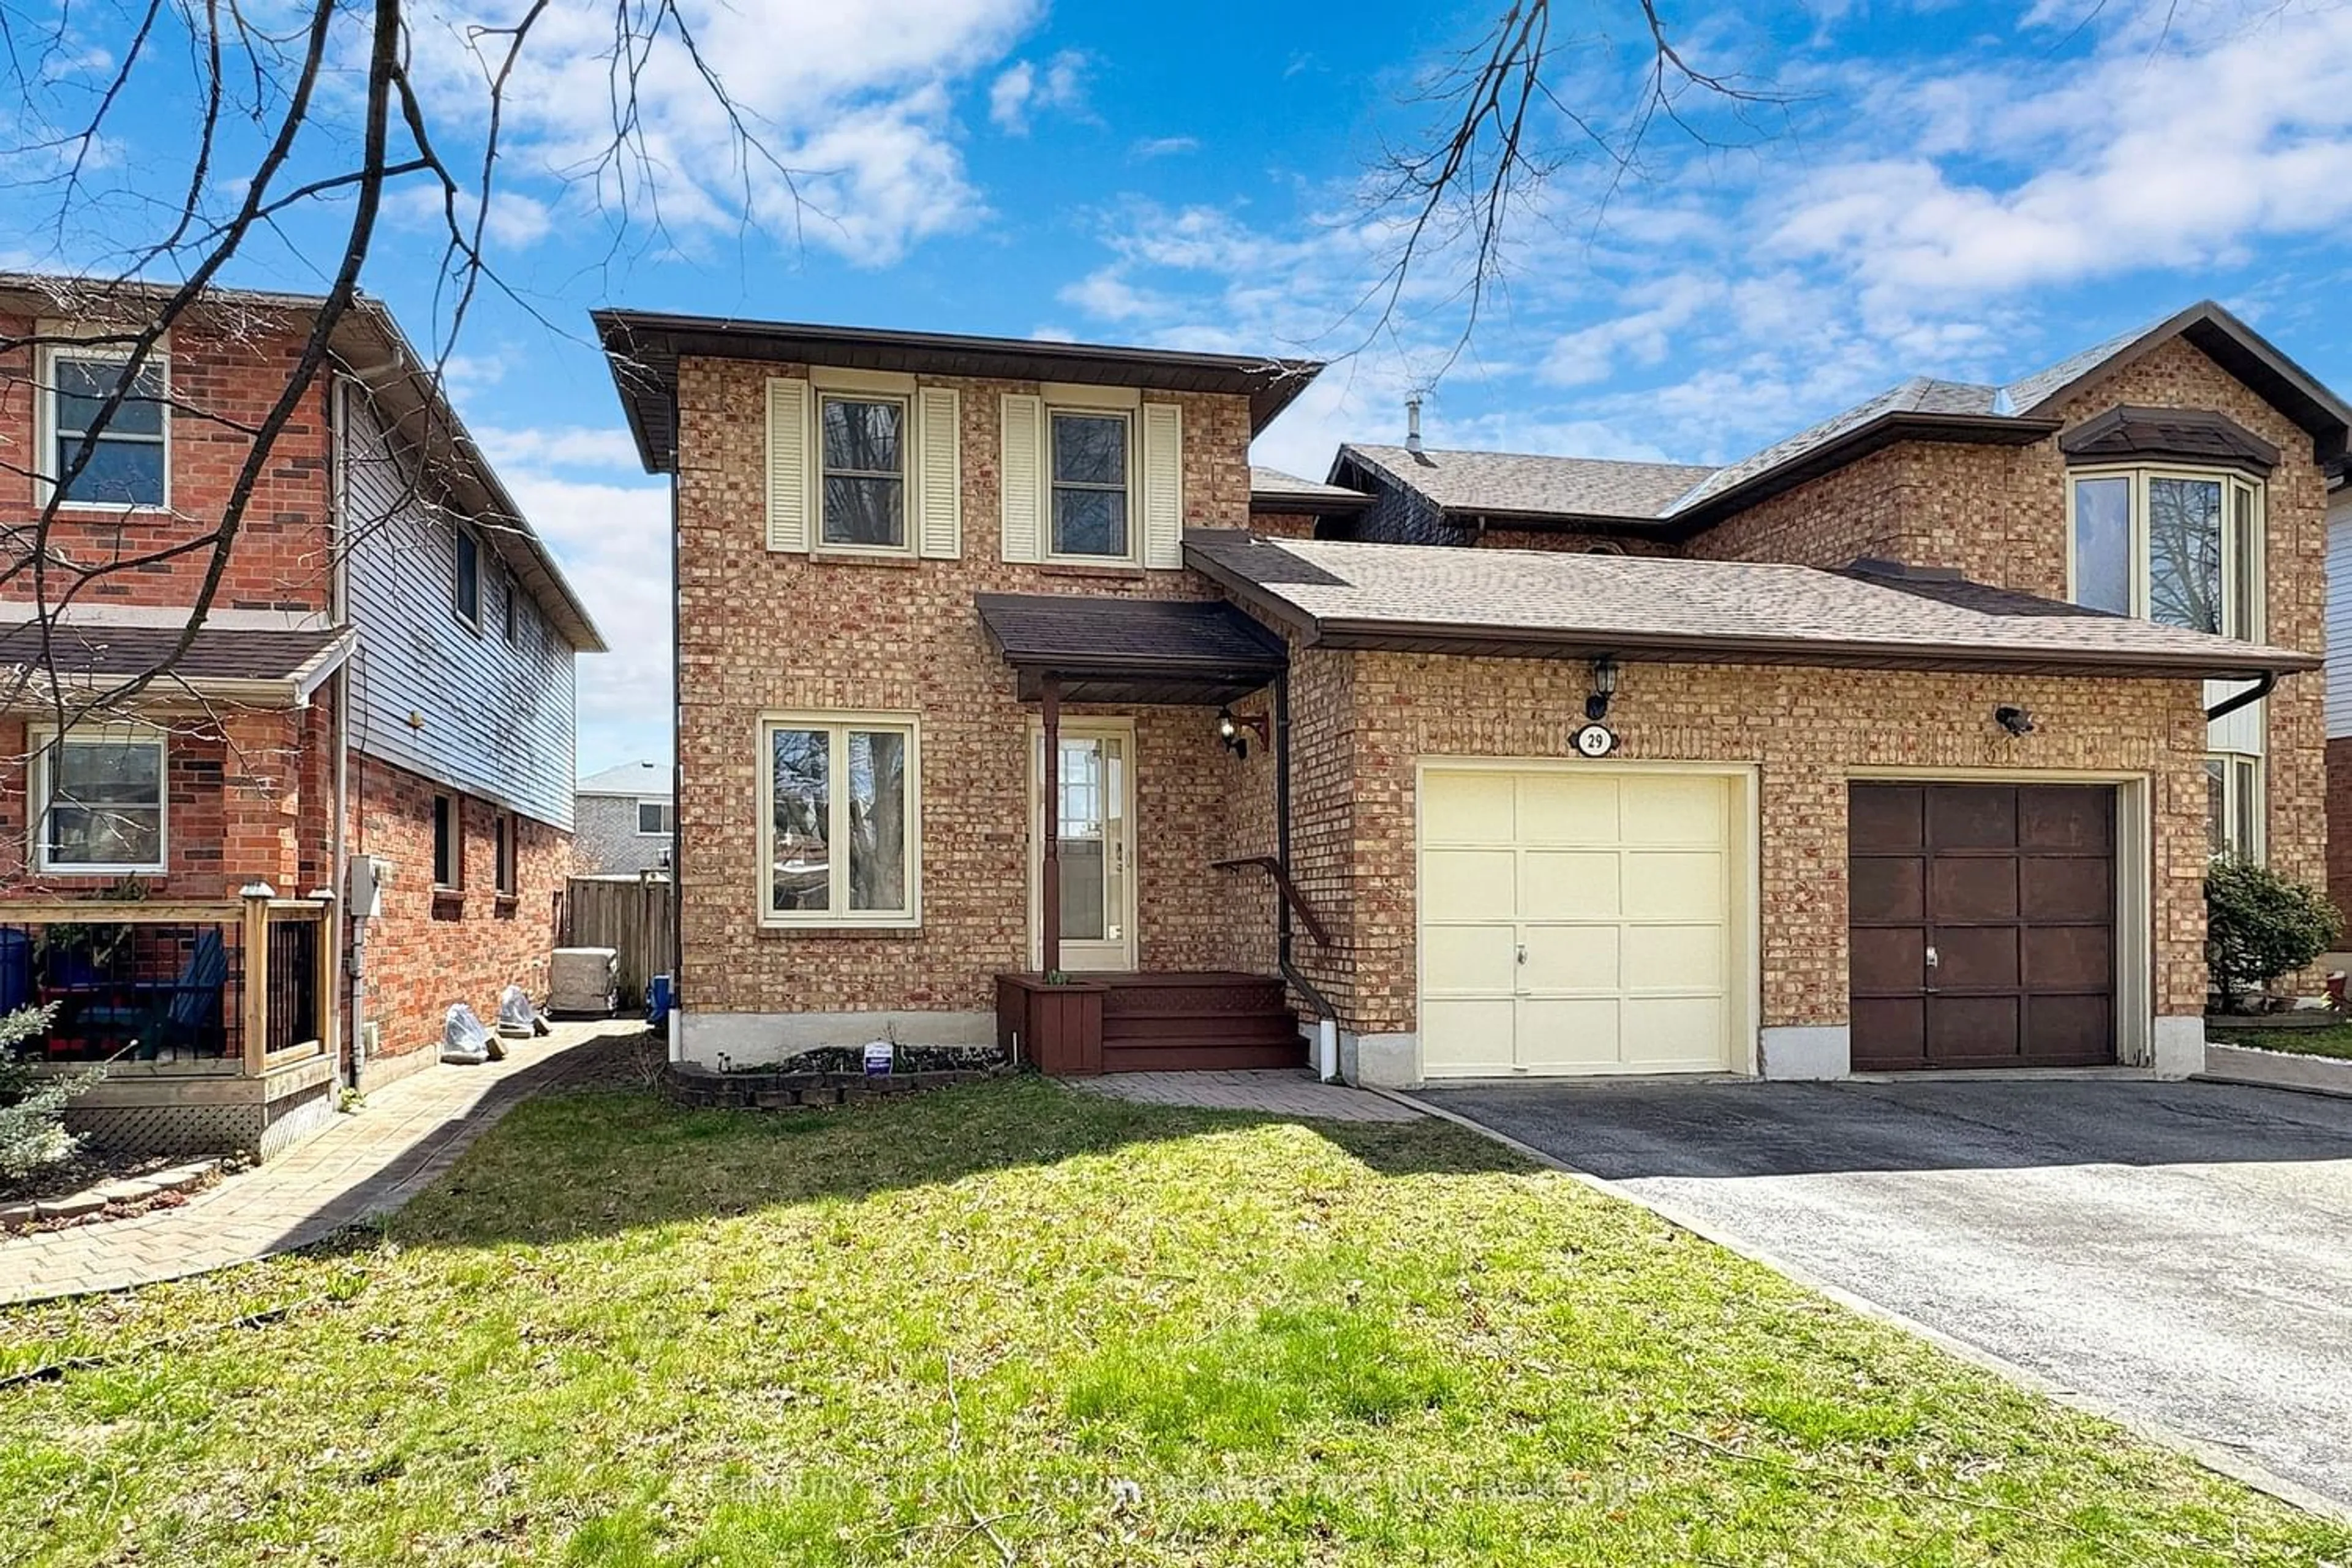 Home with brick exterior material for 29 Hewitt Cres, Ajax Ontario L1S 7A5